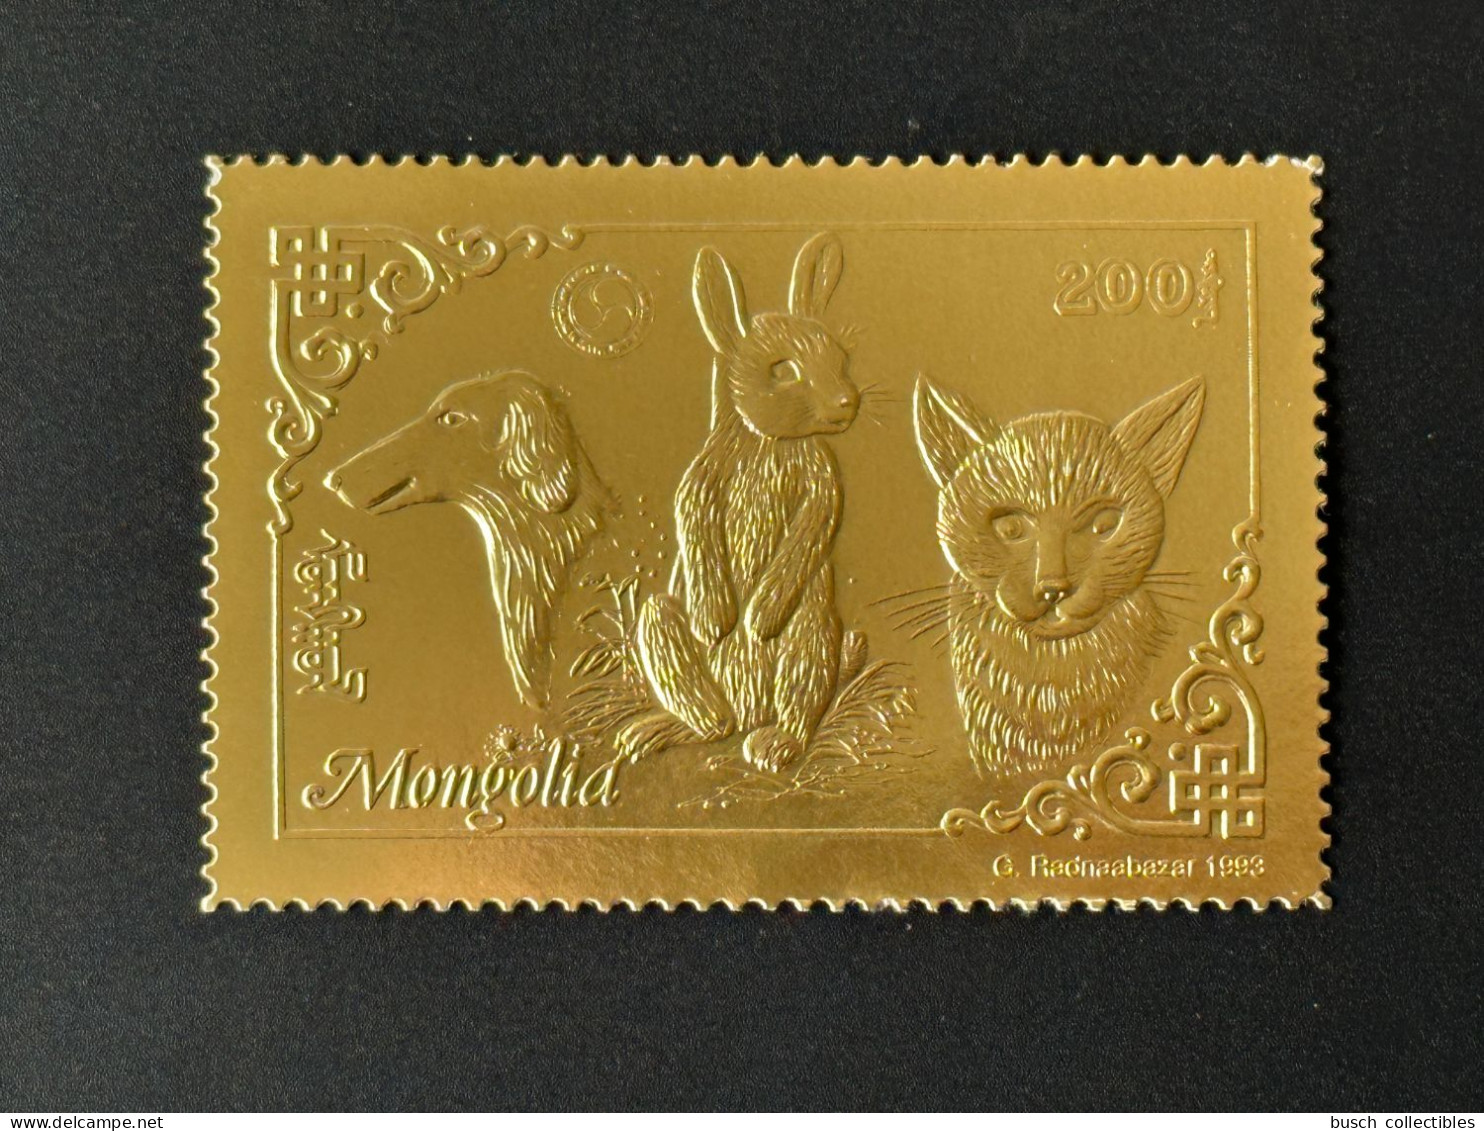 Mongolie Mongolia 1993 Mi. 2473 A Or Gold Rotary Lions Chien Hund Dog Katze Cat Chat Lapin Rabbit Hase - Hasen